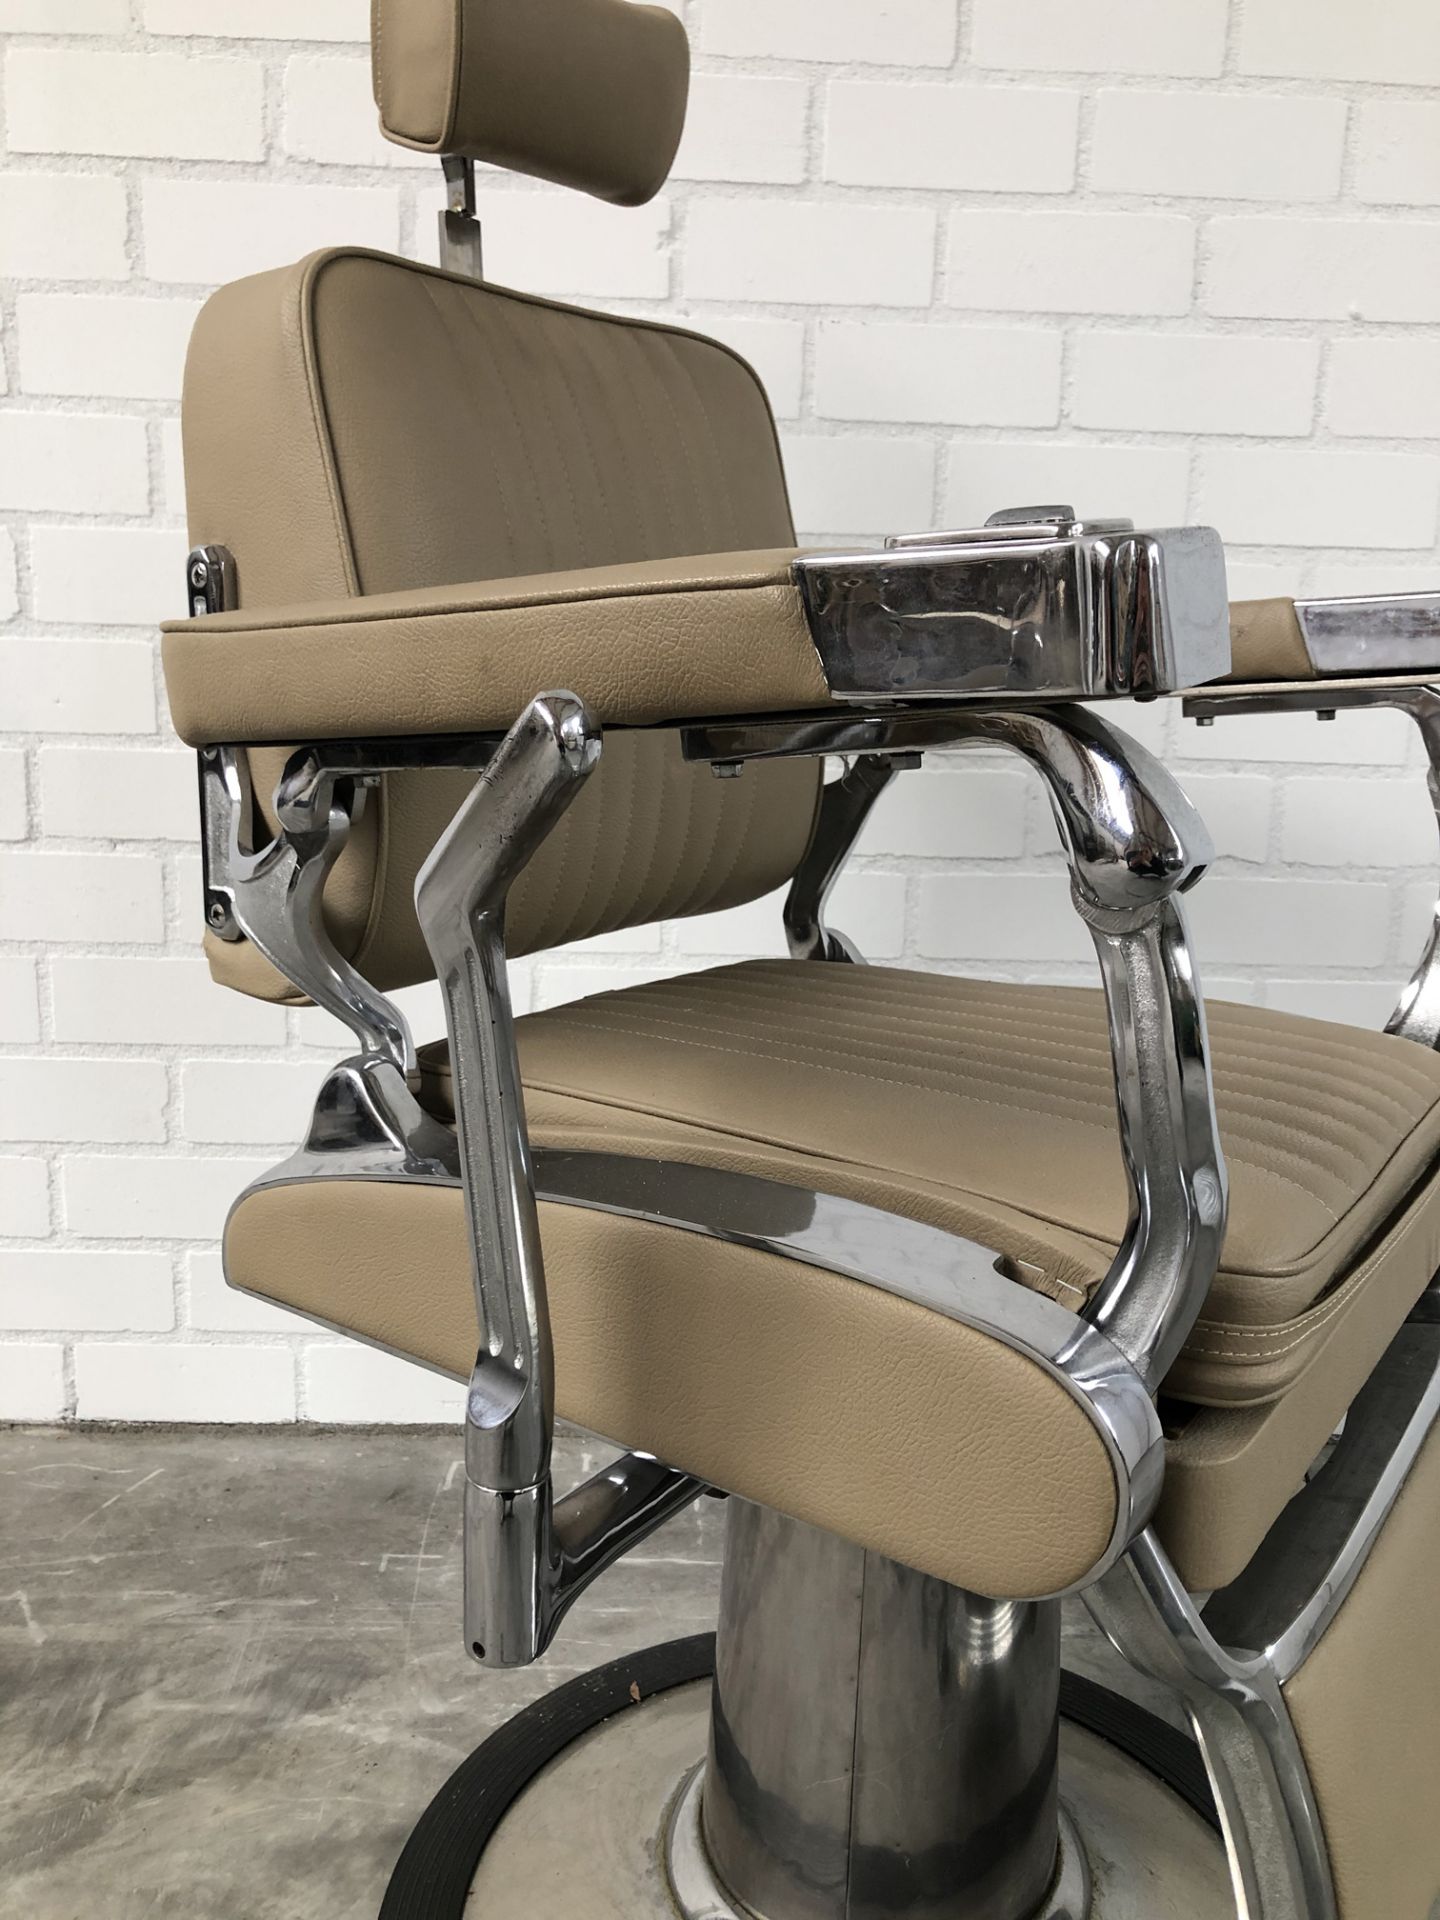 Completely Restored Original Barber Chair - Image 11 of 13